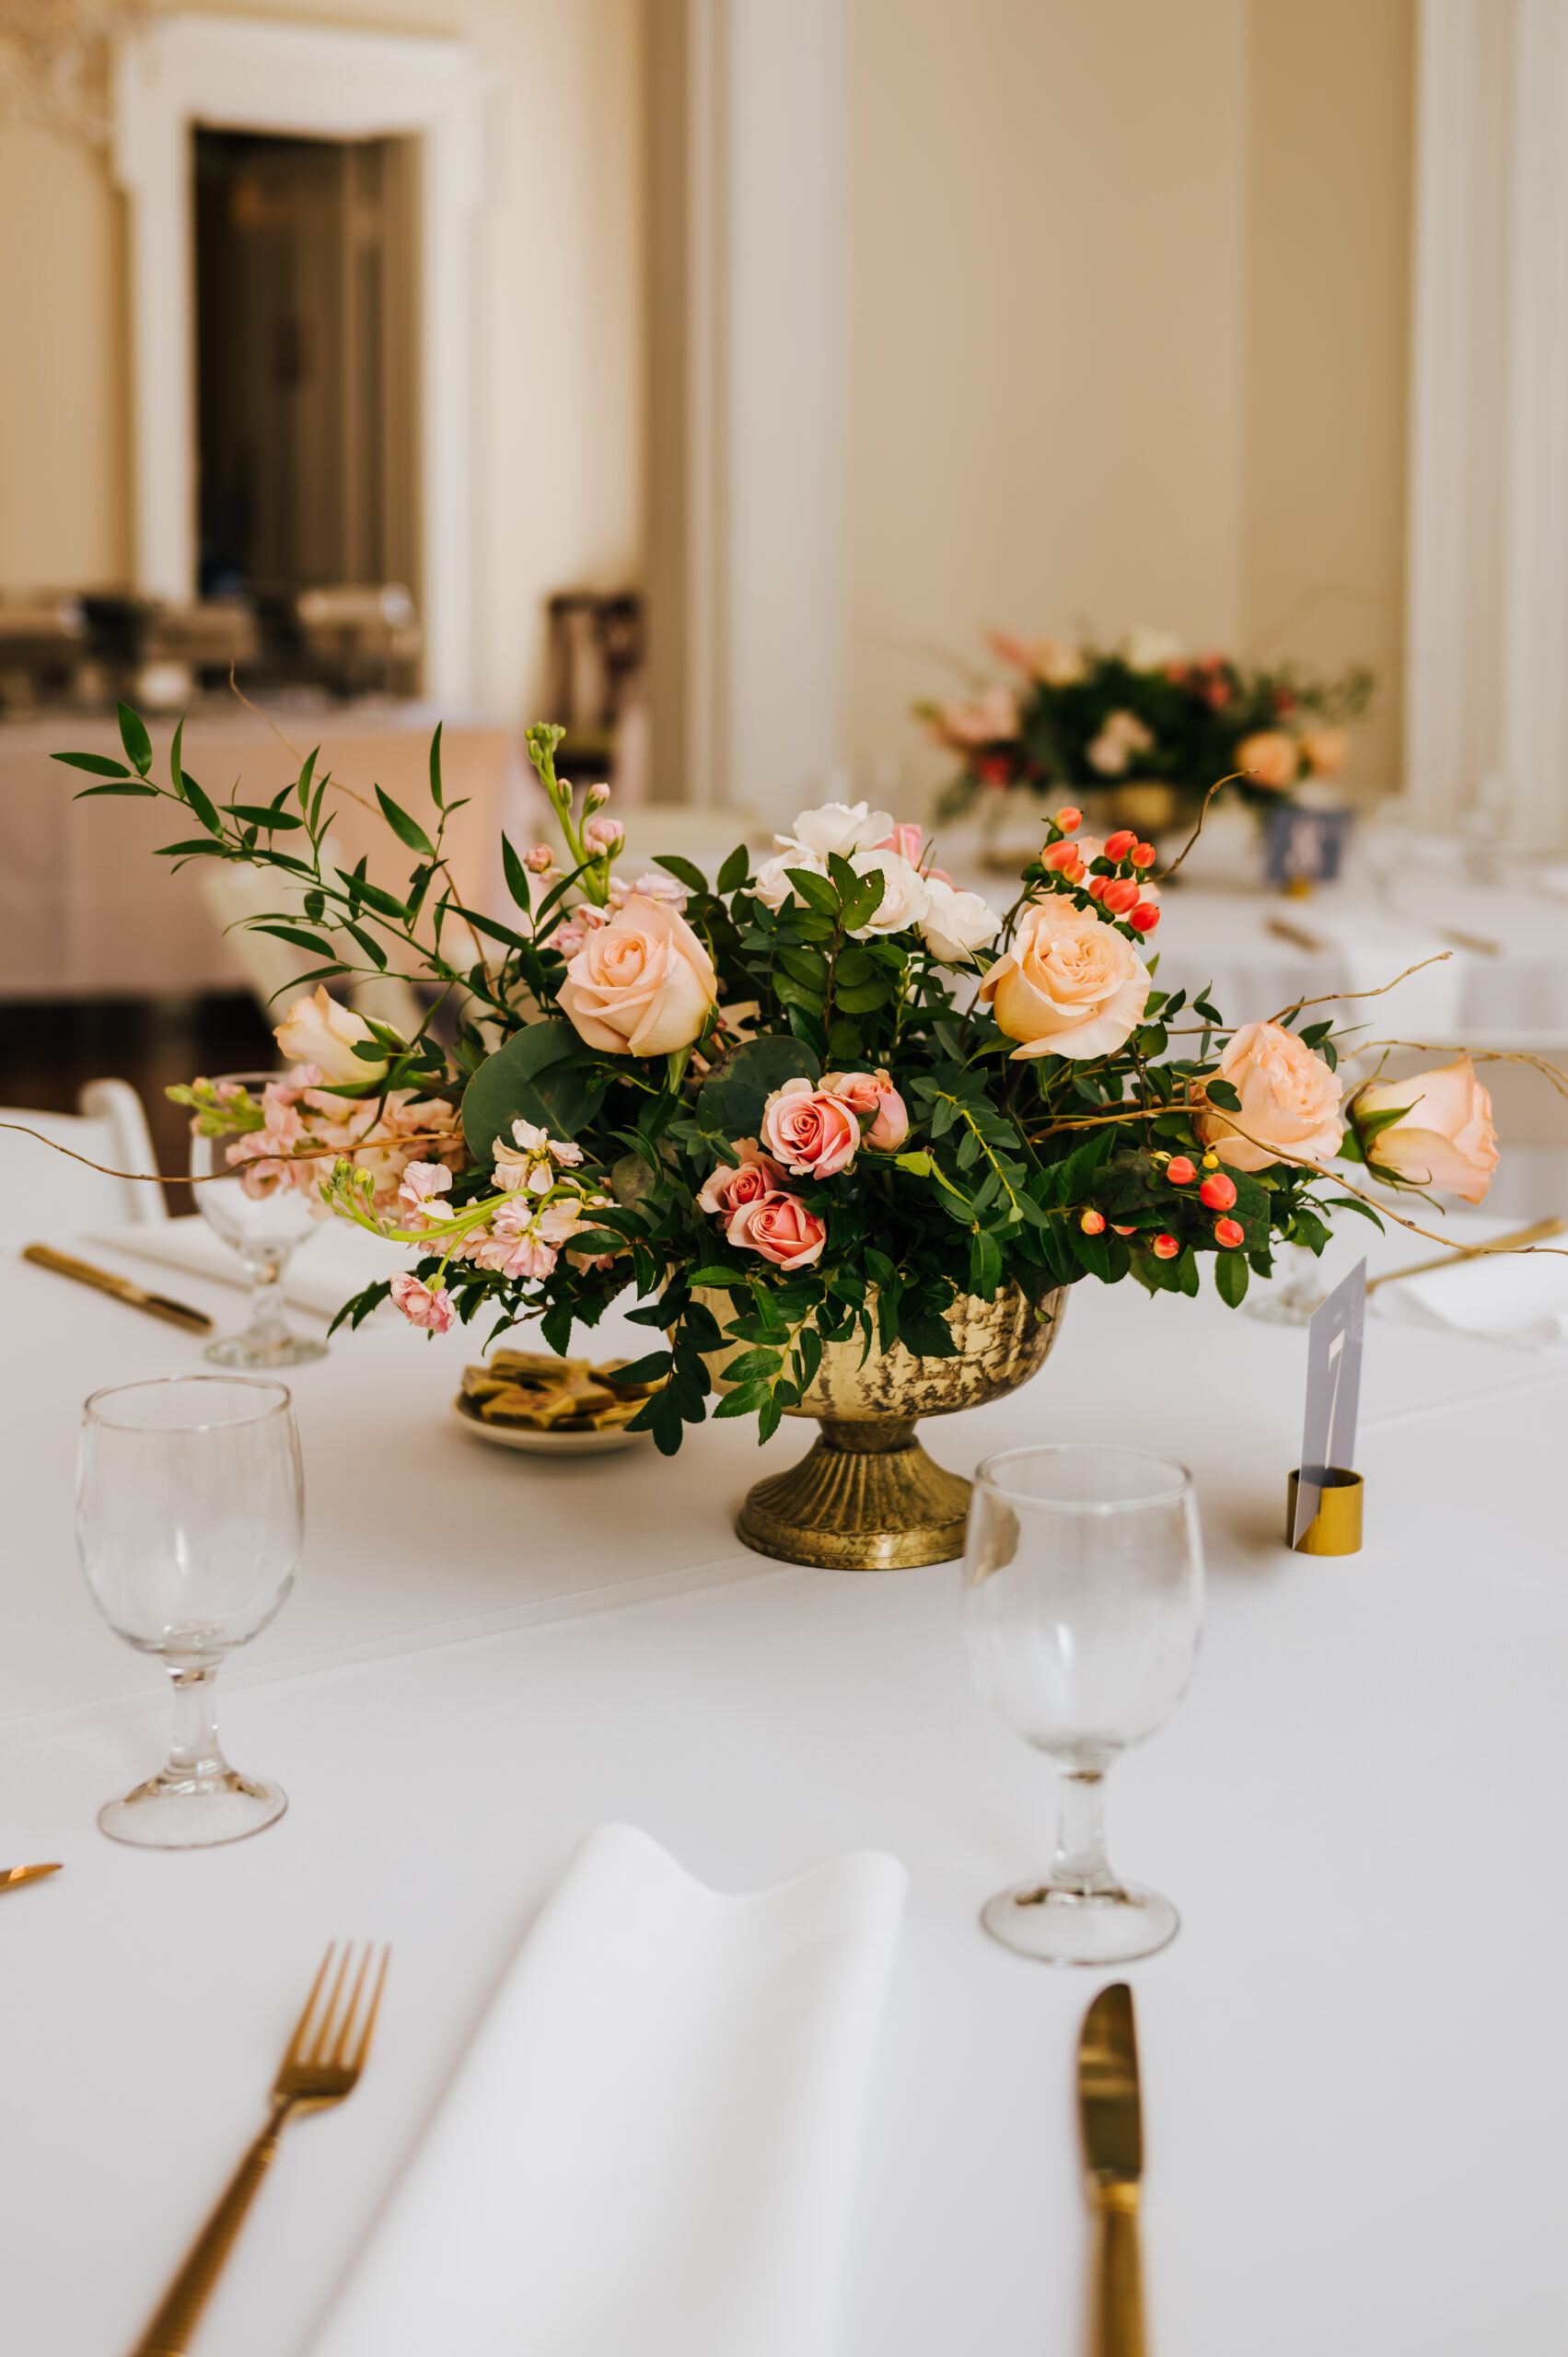 A peach toned bouquet sits in a golden vase on a decorated wedding reception table